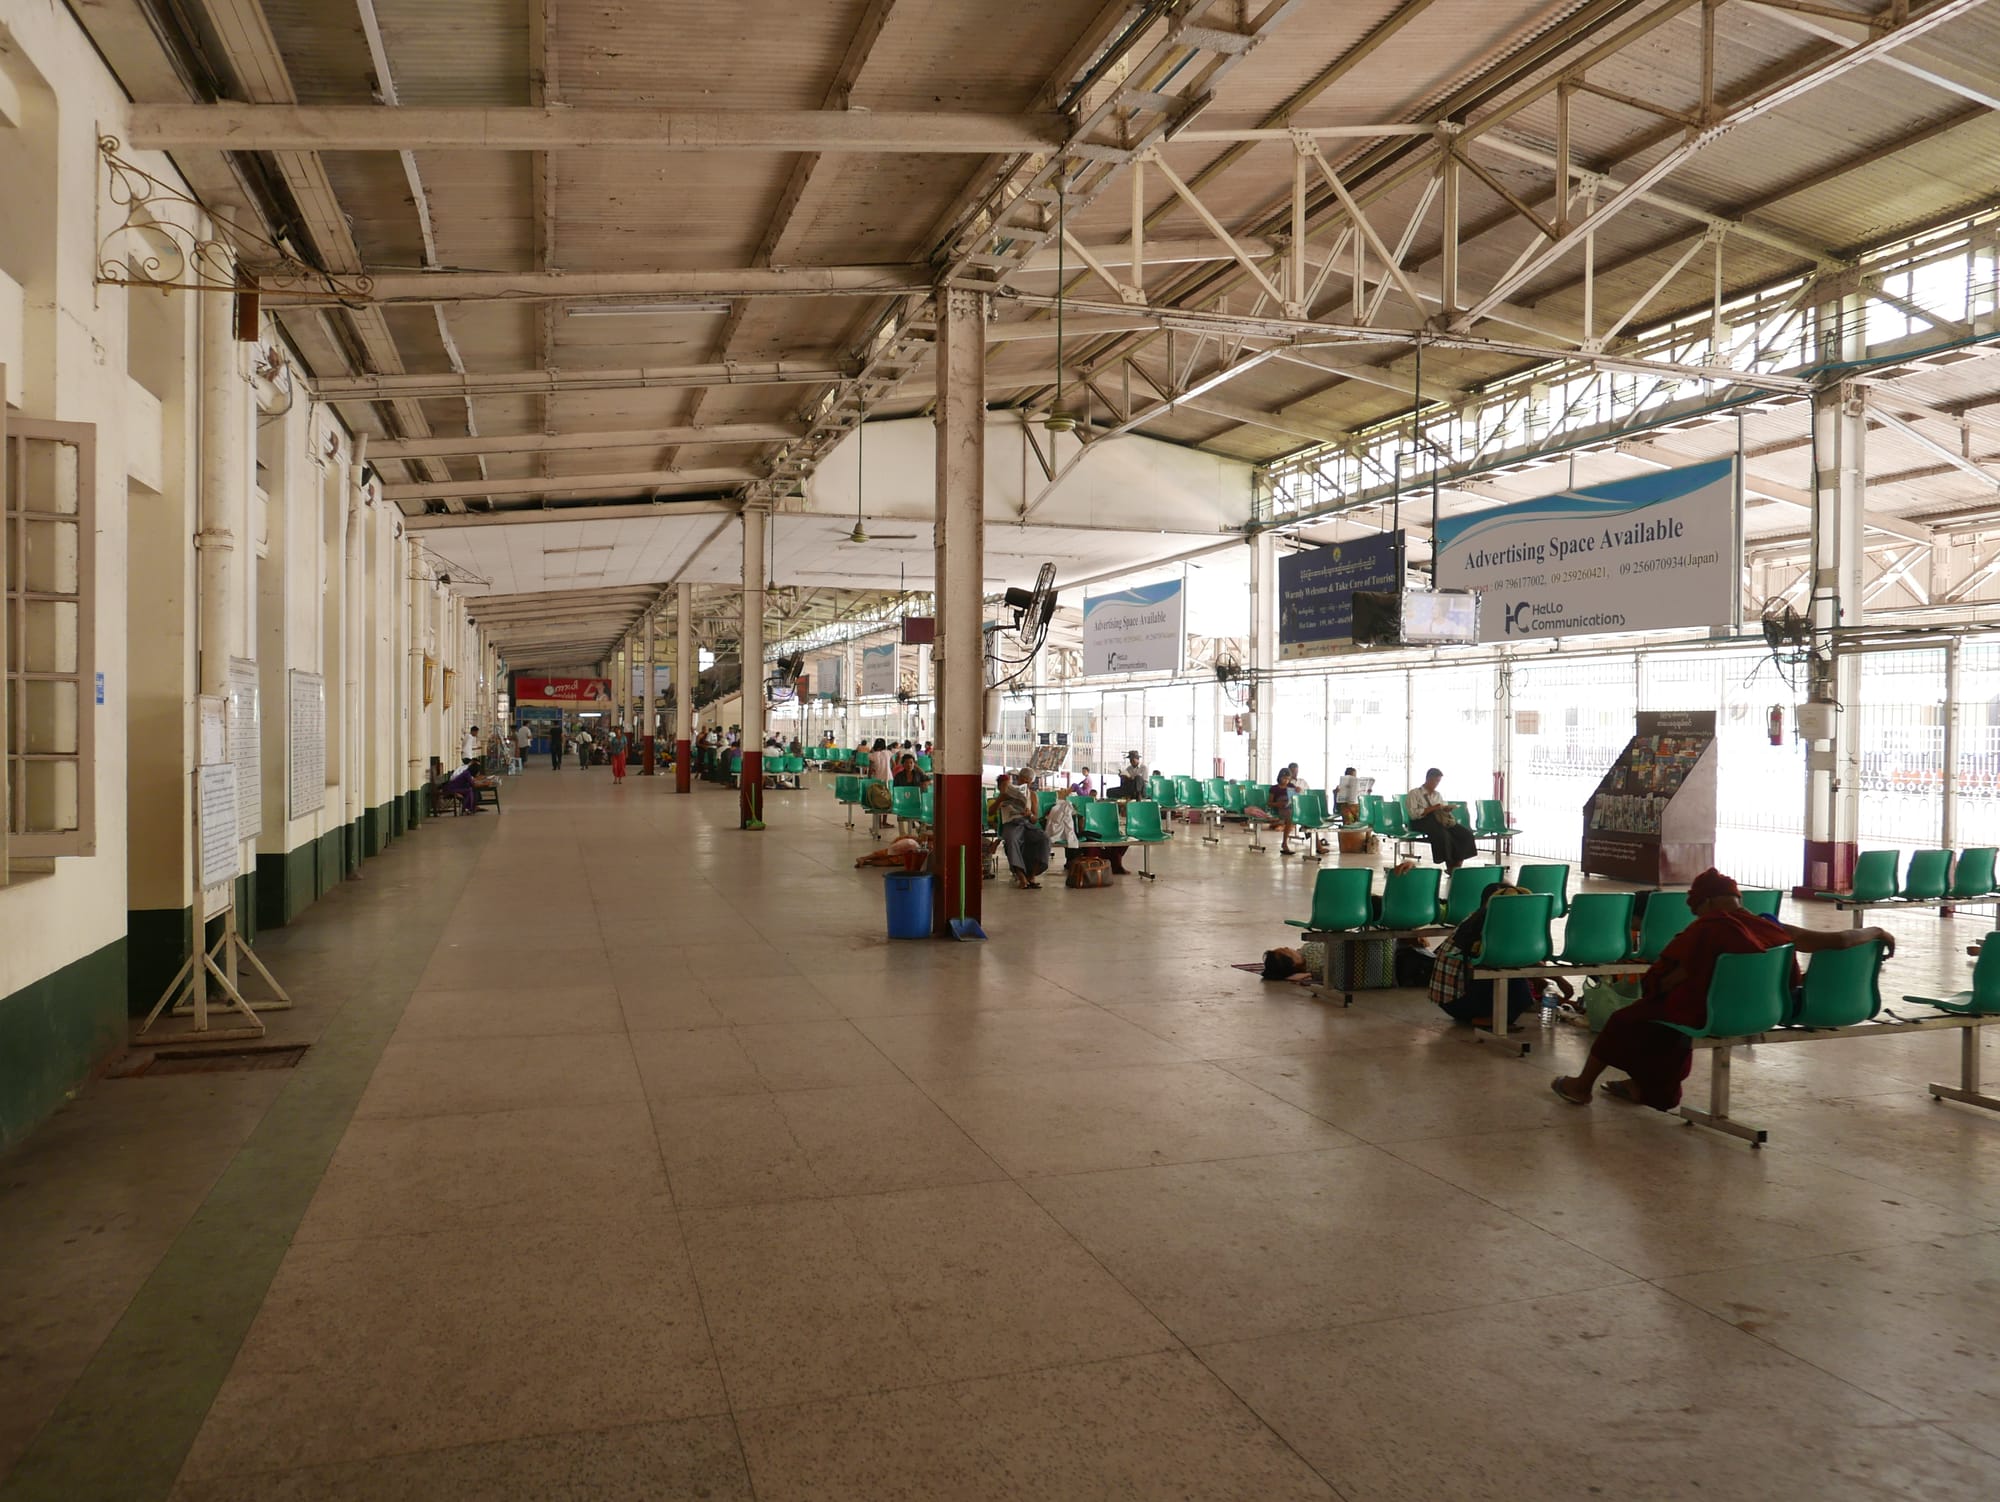 Photo by Author — main waiting area at Yangon Train Station